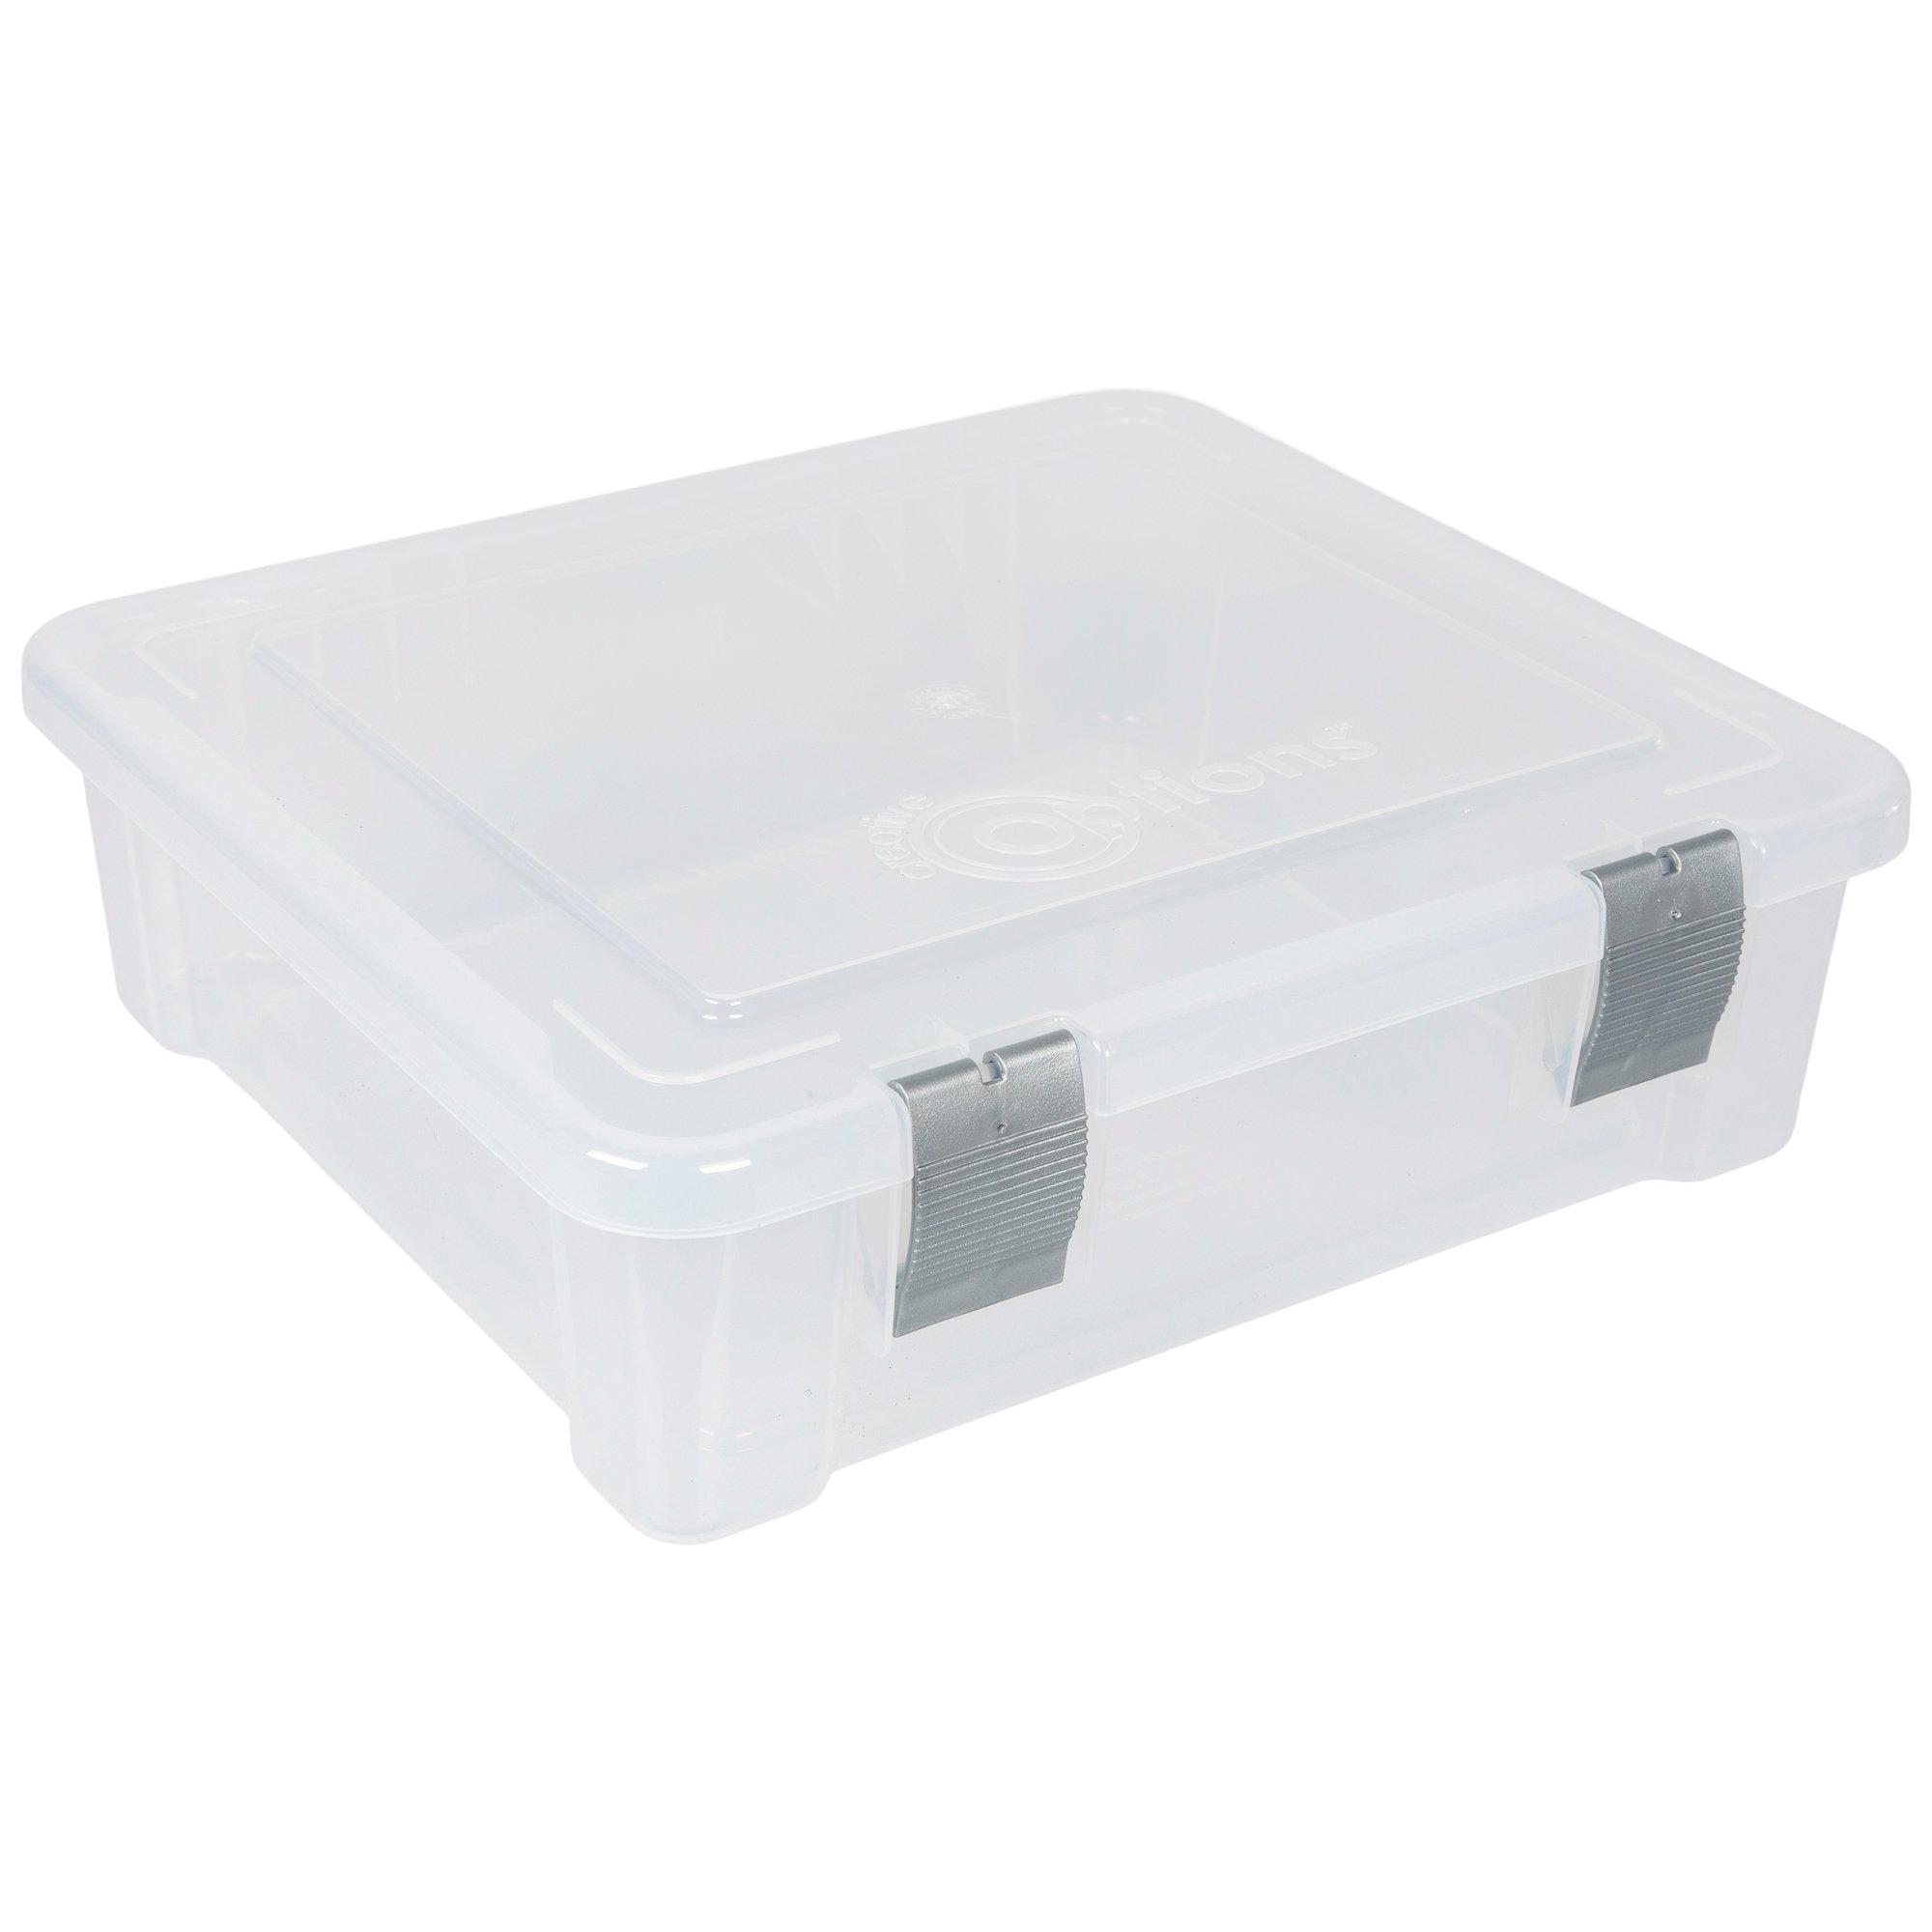 Art & Craft Storage Box with Handle, Plastic Sewing Organizer with 2 Trays,  PACK - Kroger